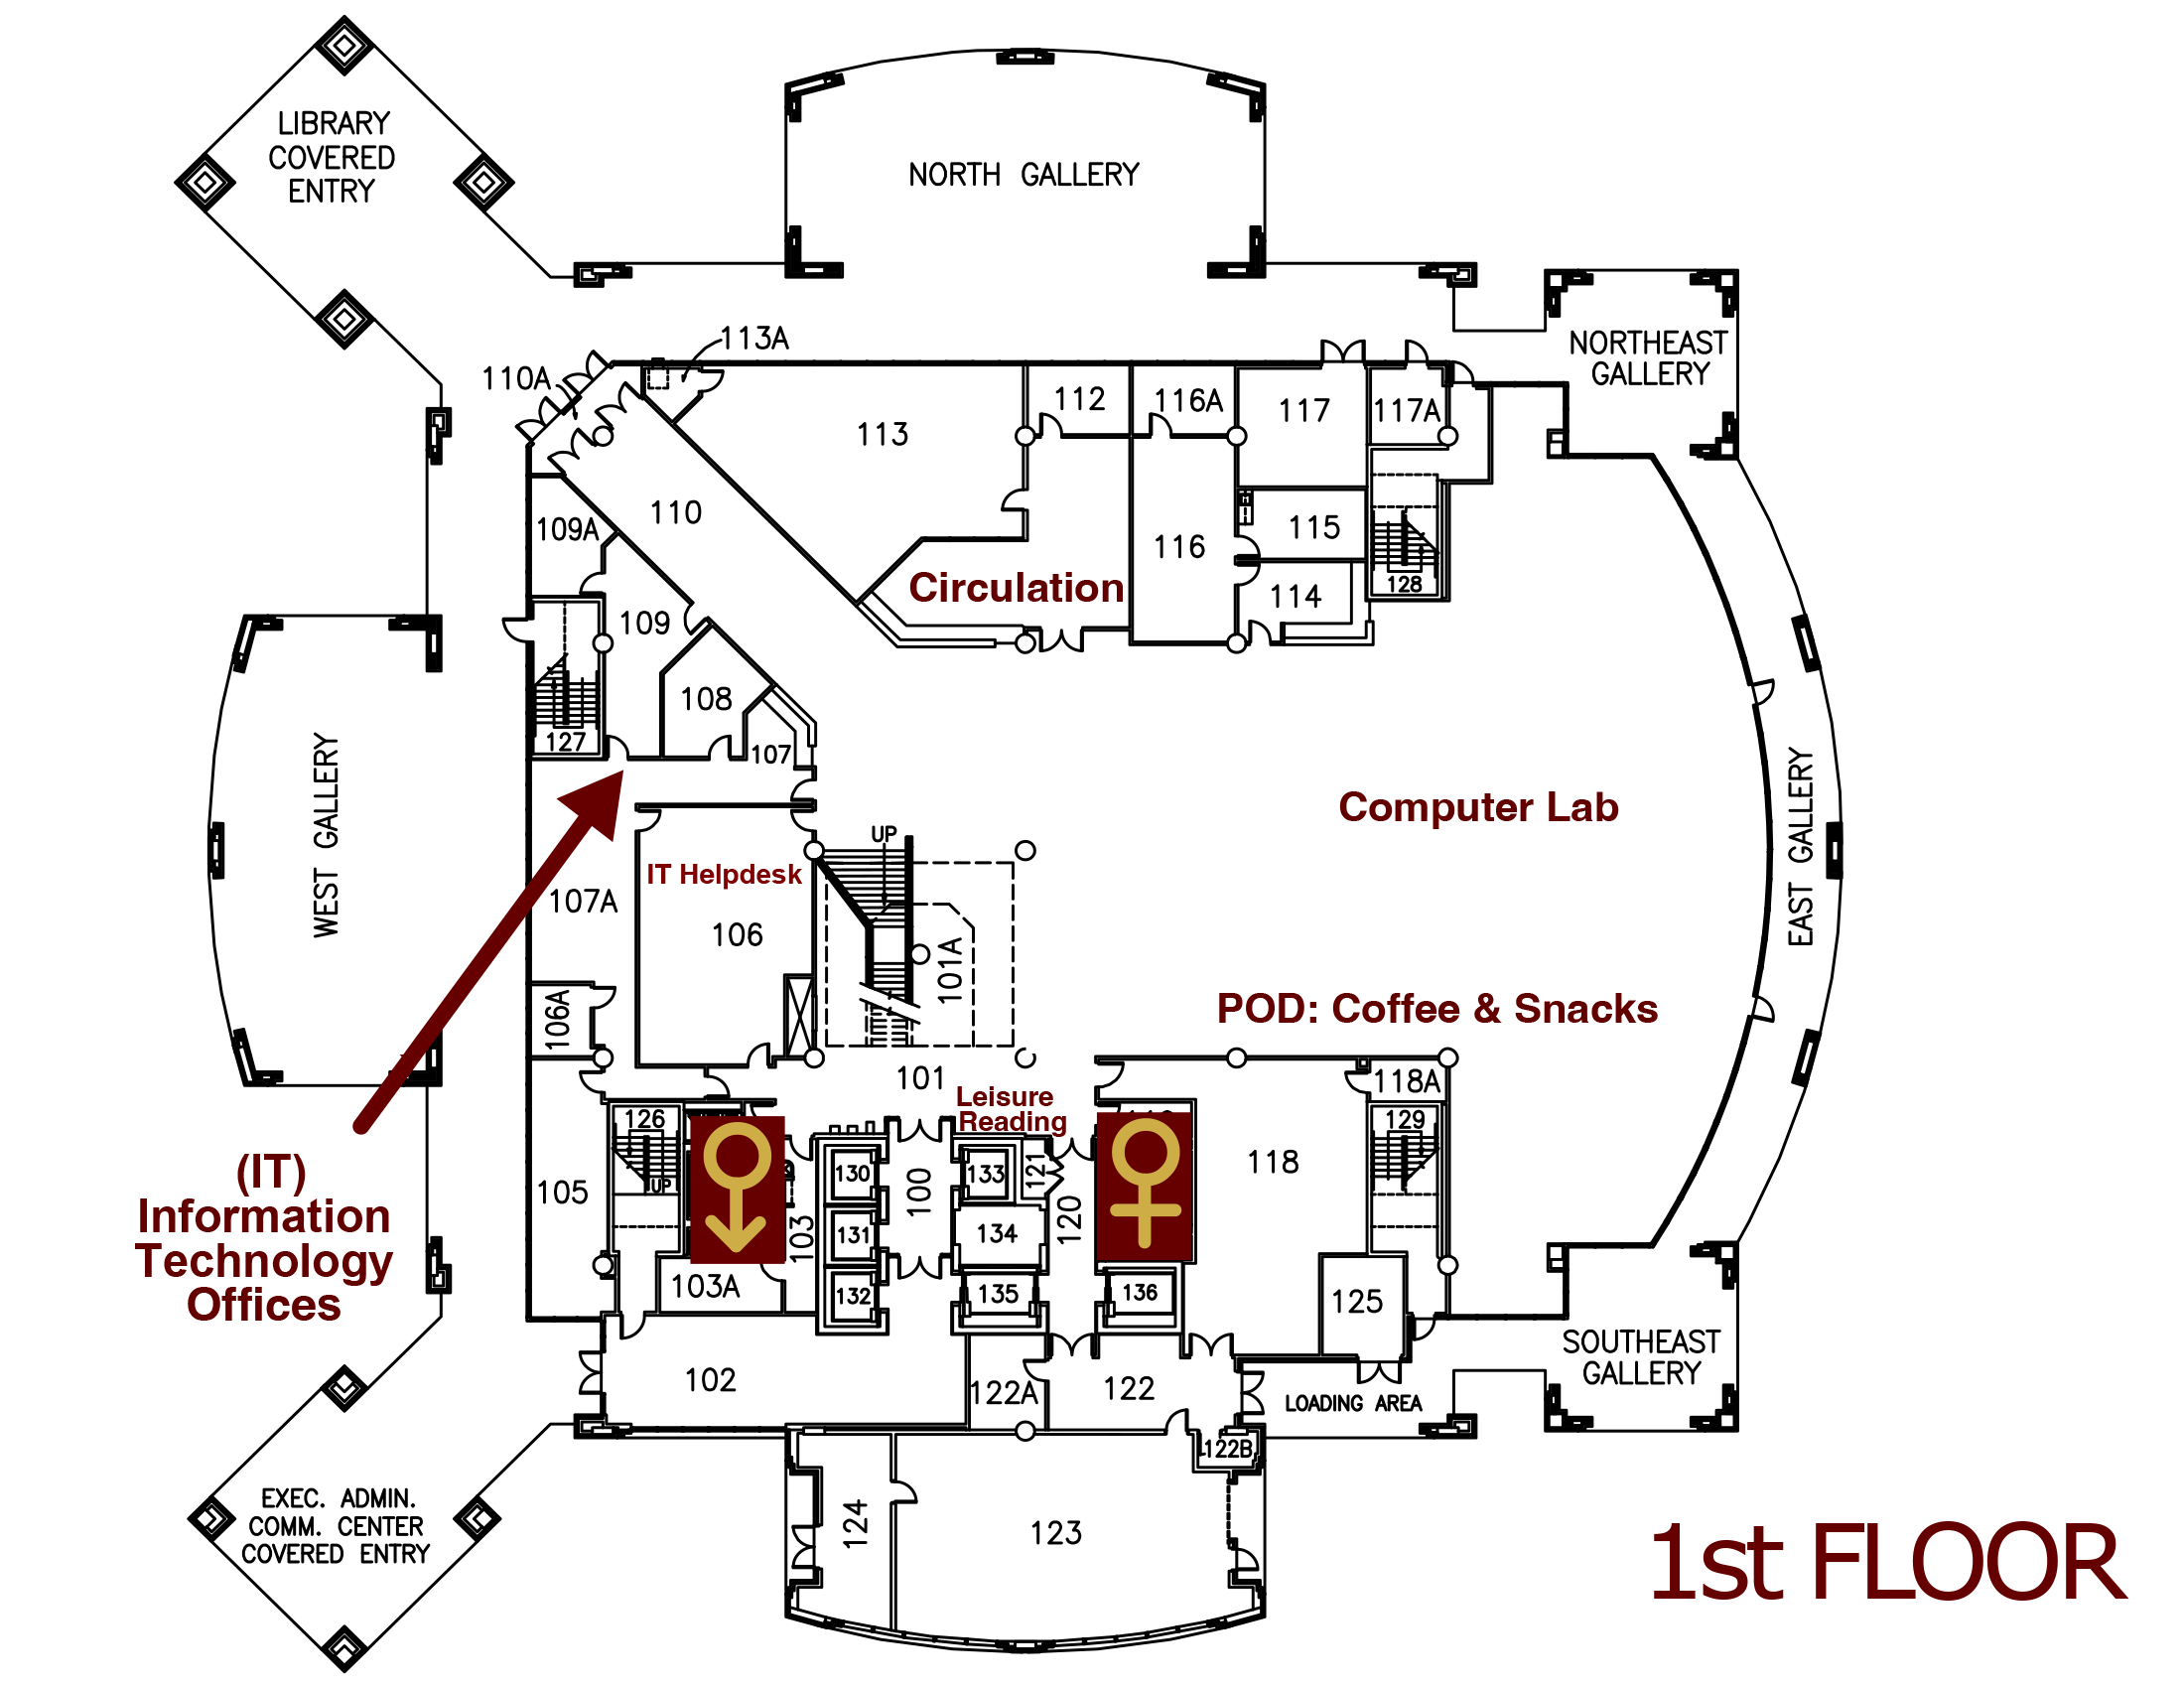 first floor library map see text list below